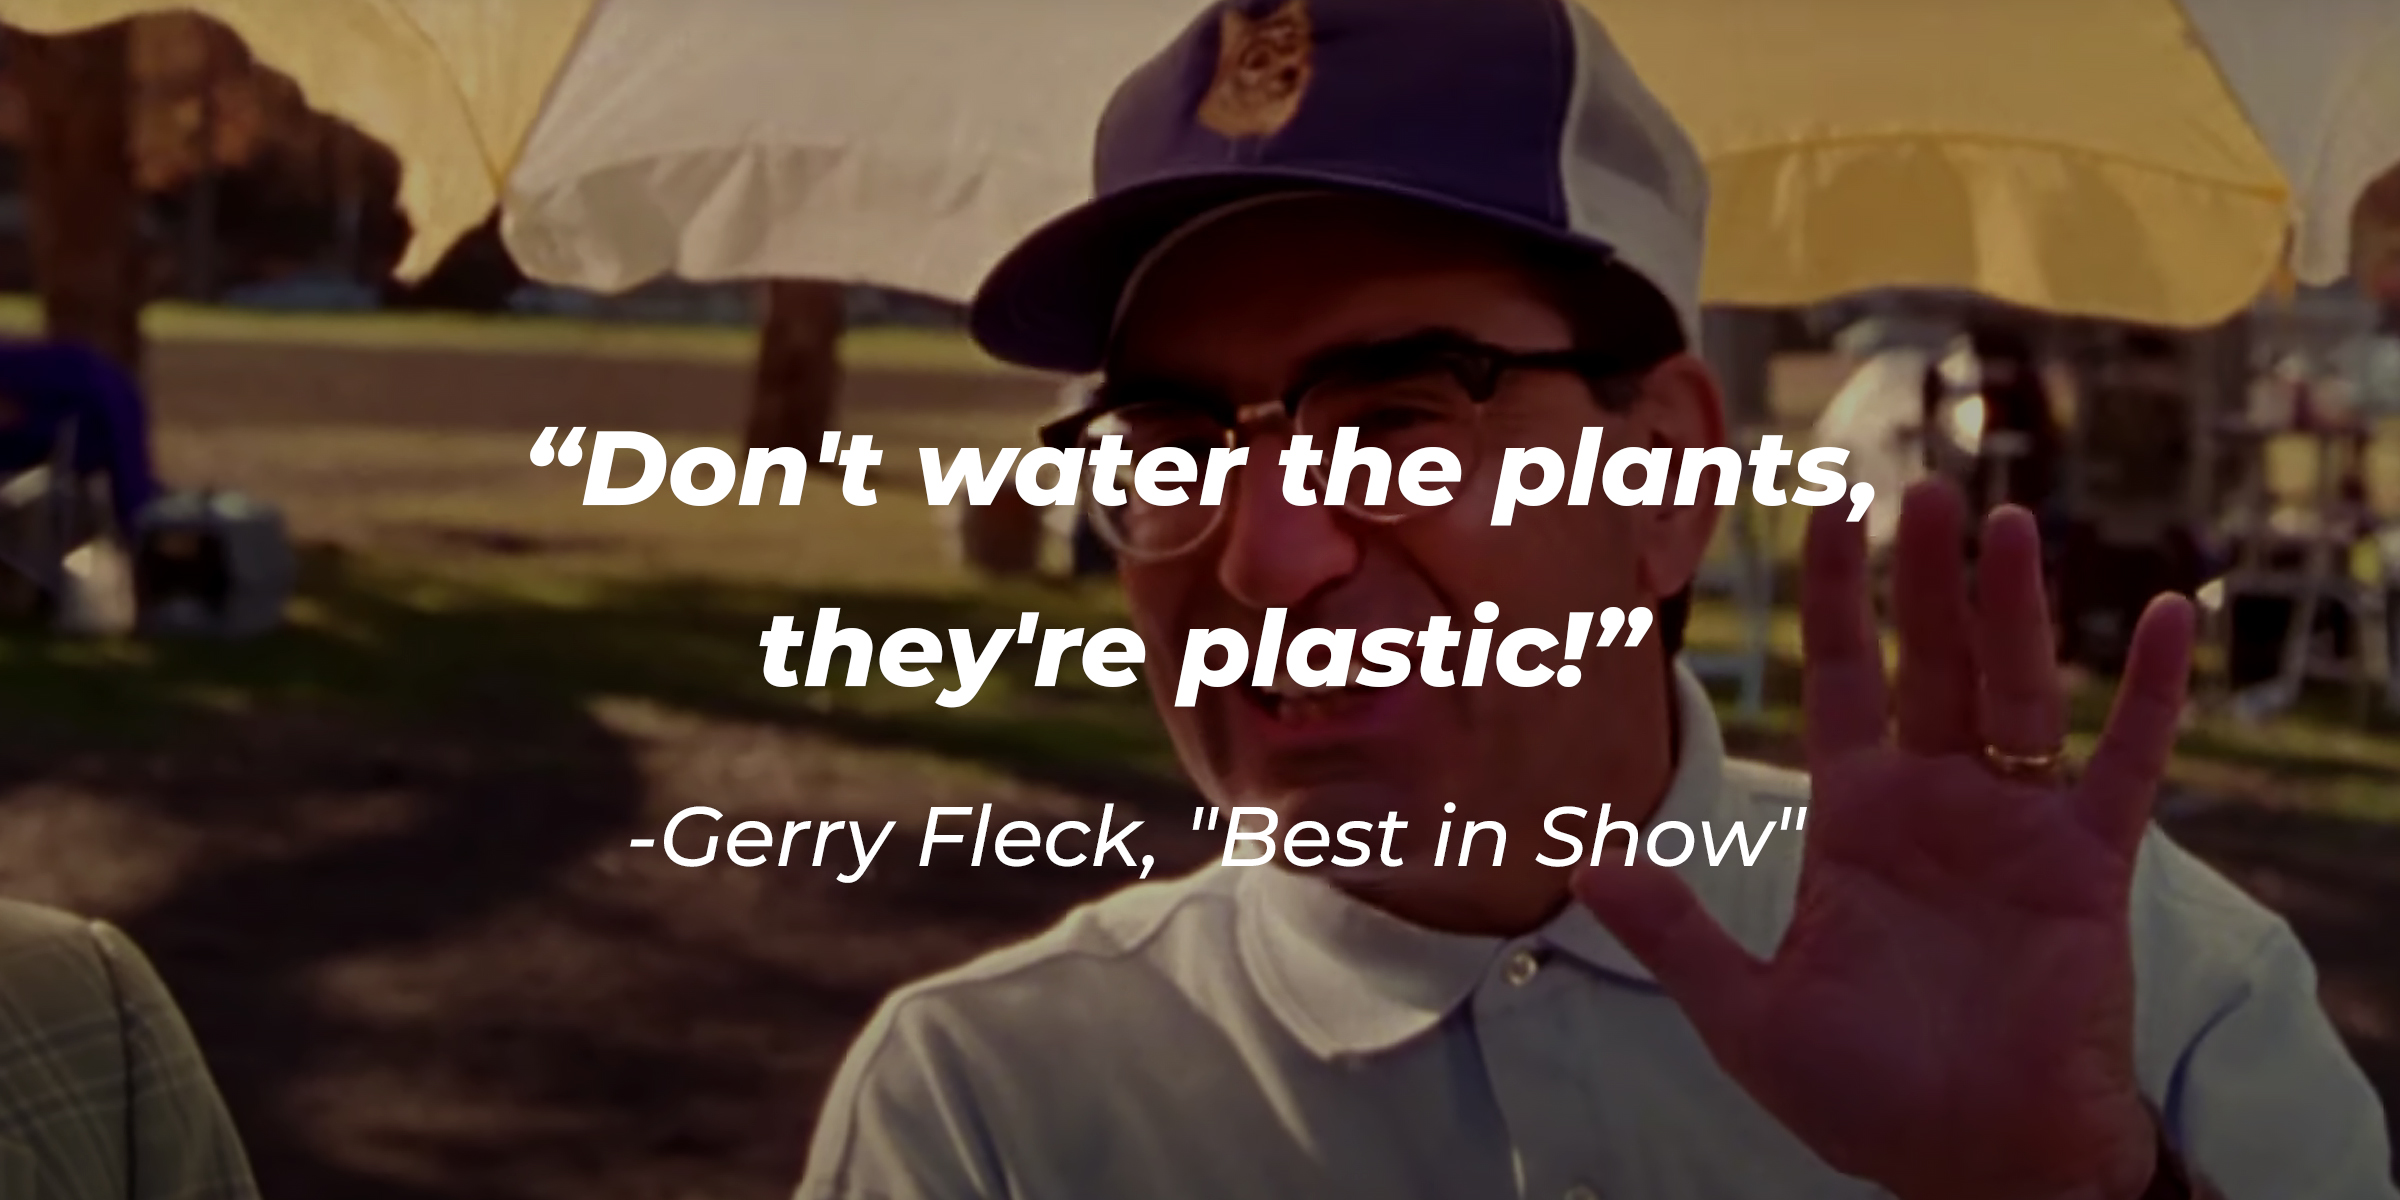 Gerry Fleck with his quote: "Don't water the plants, they're plastic!" | Source: Youtube.com/hbomax